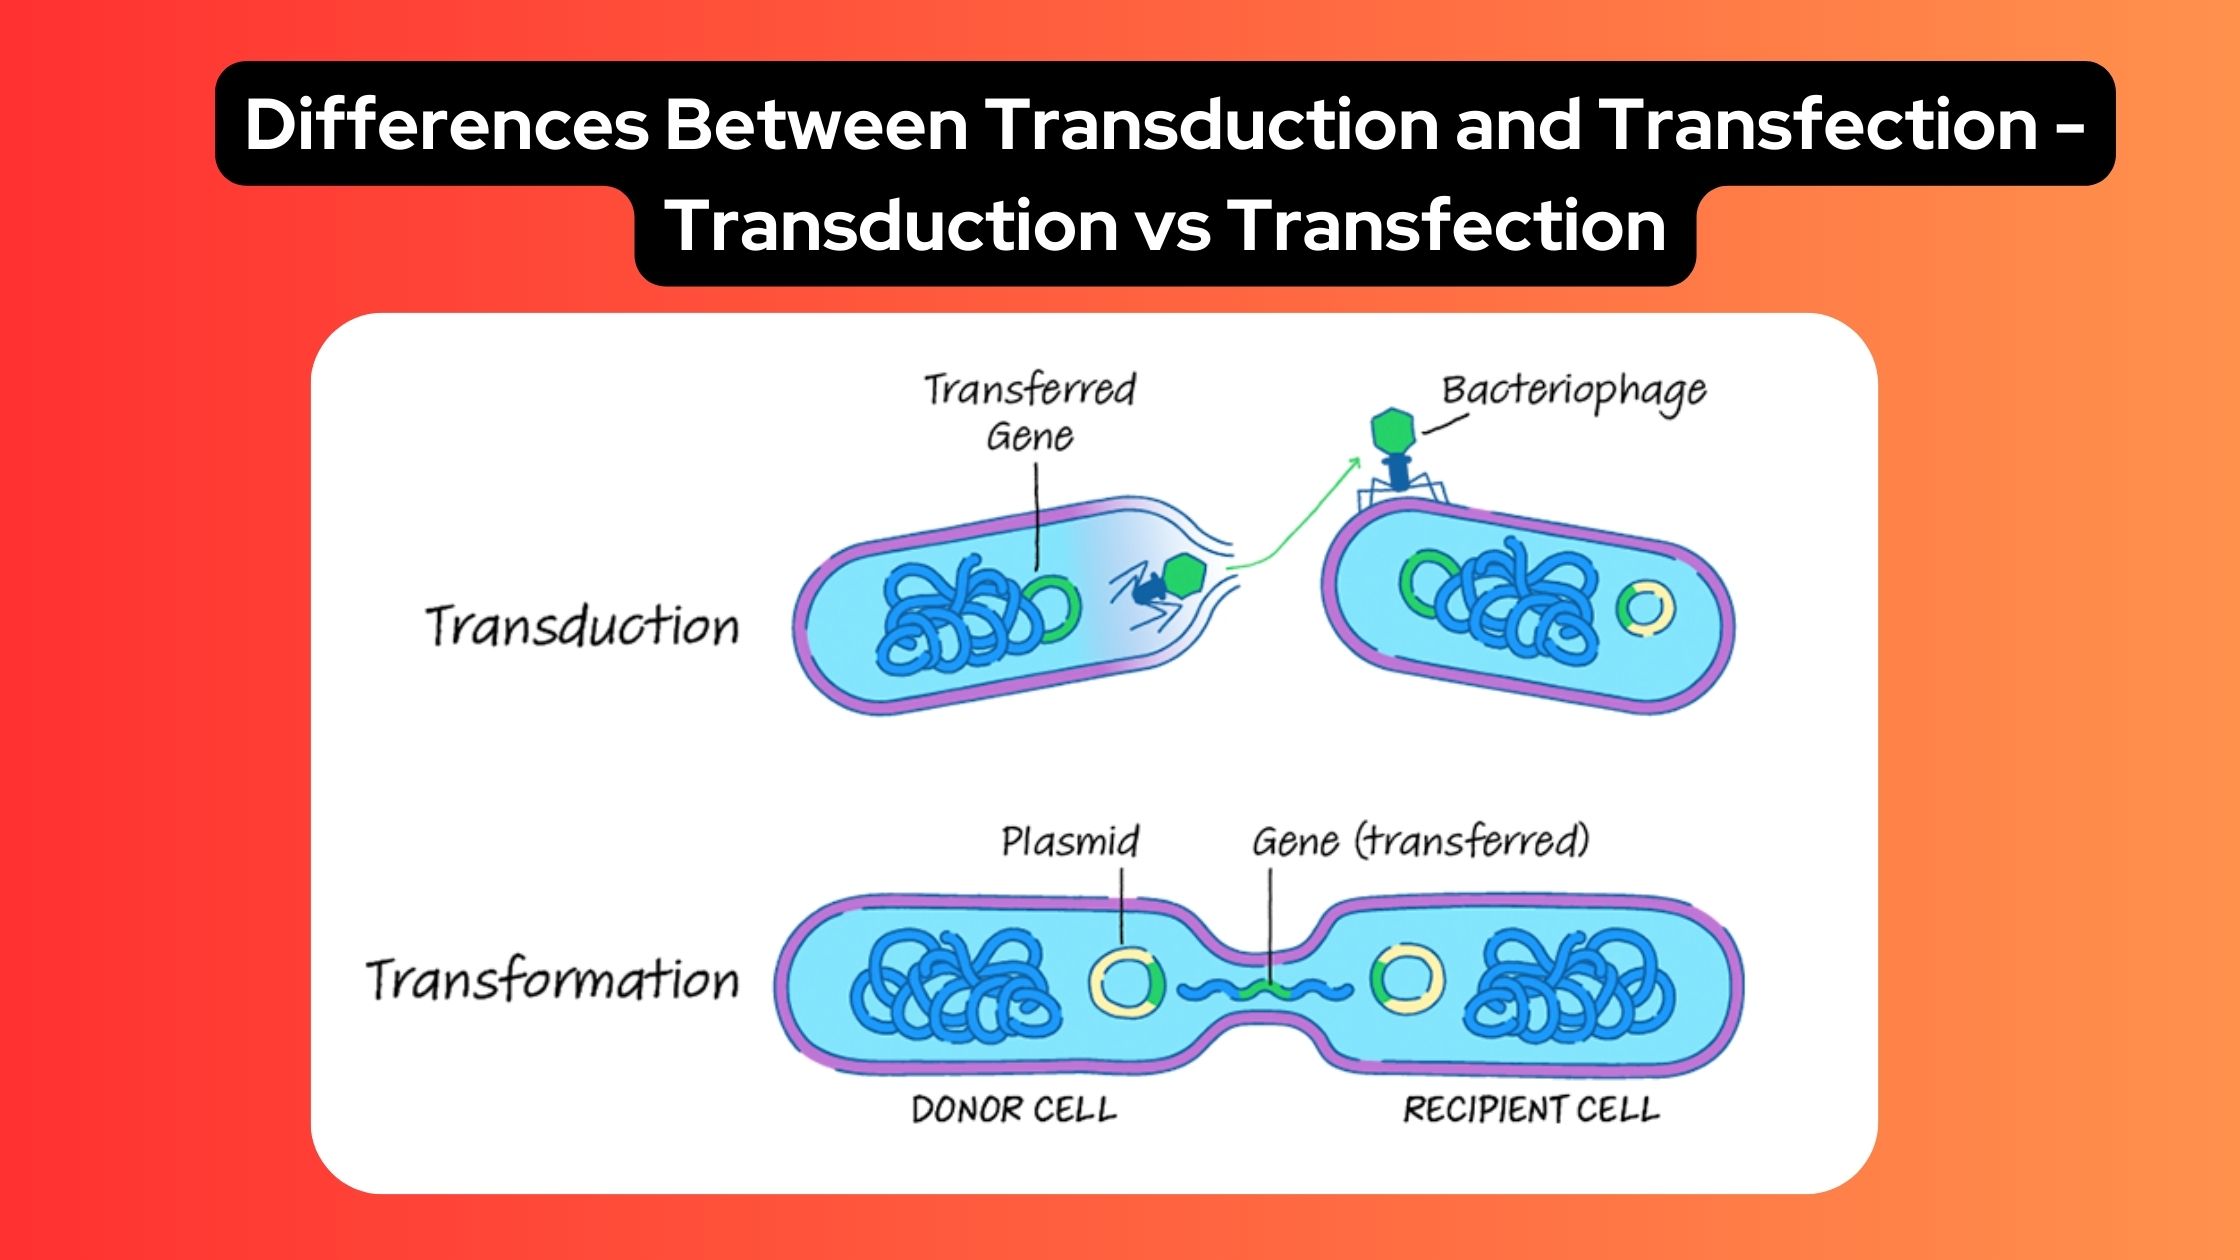 Differences Between Transduction and Transfection - Transduction vs Transfection